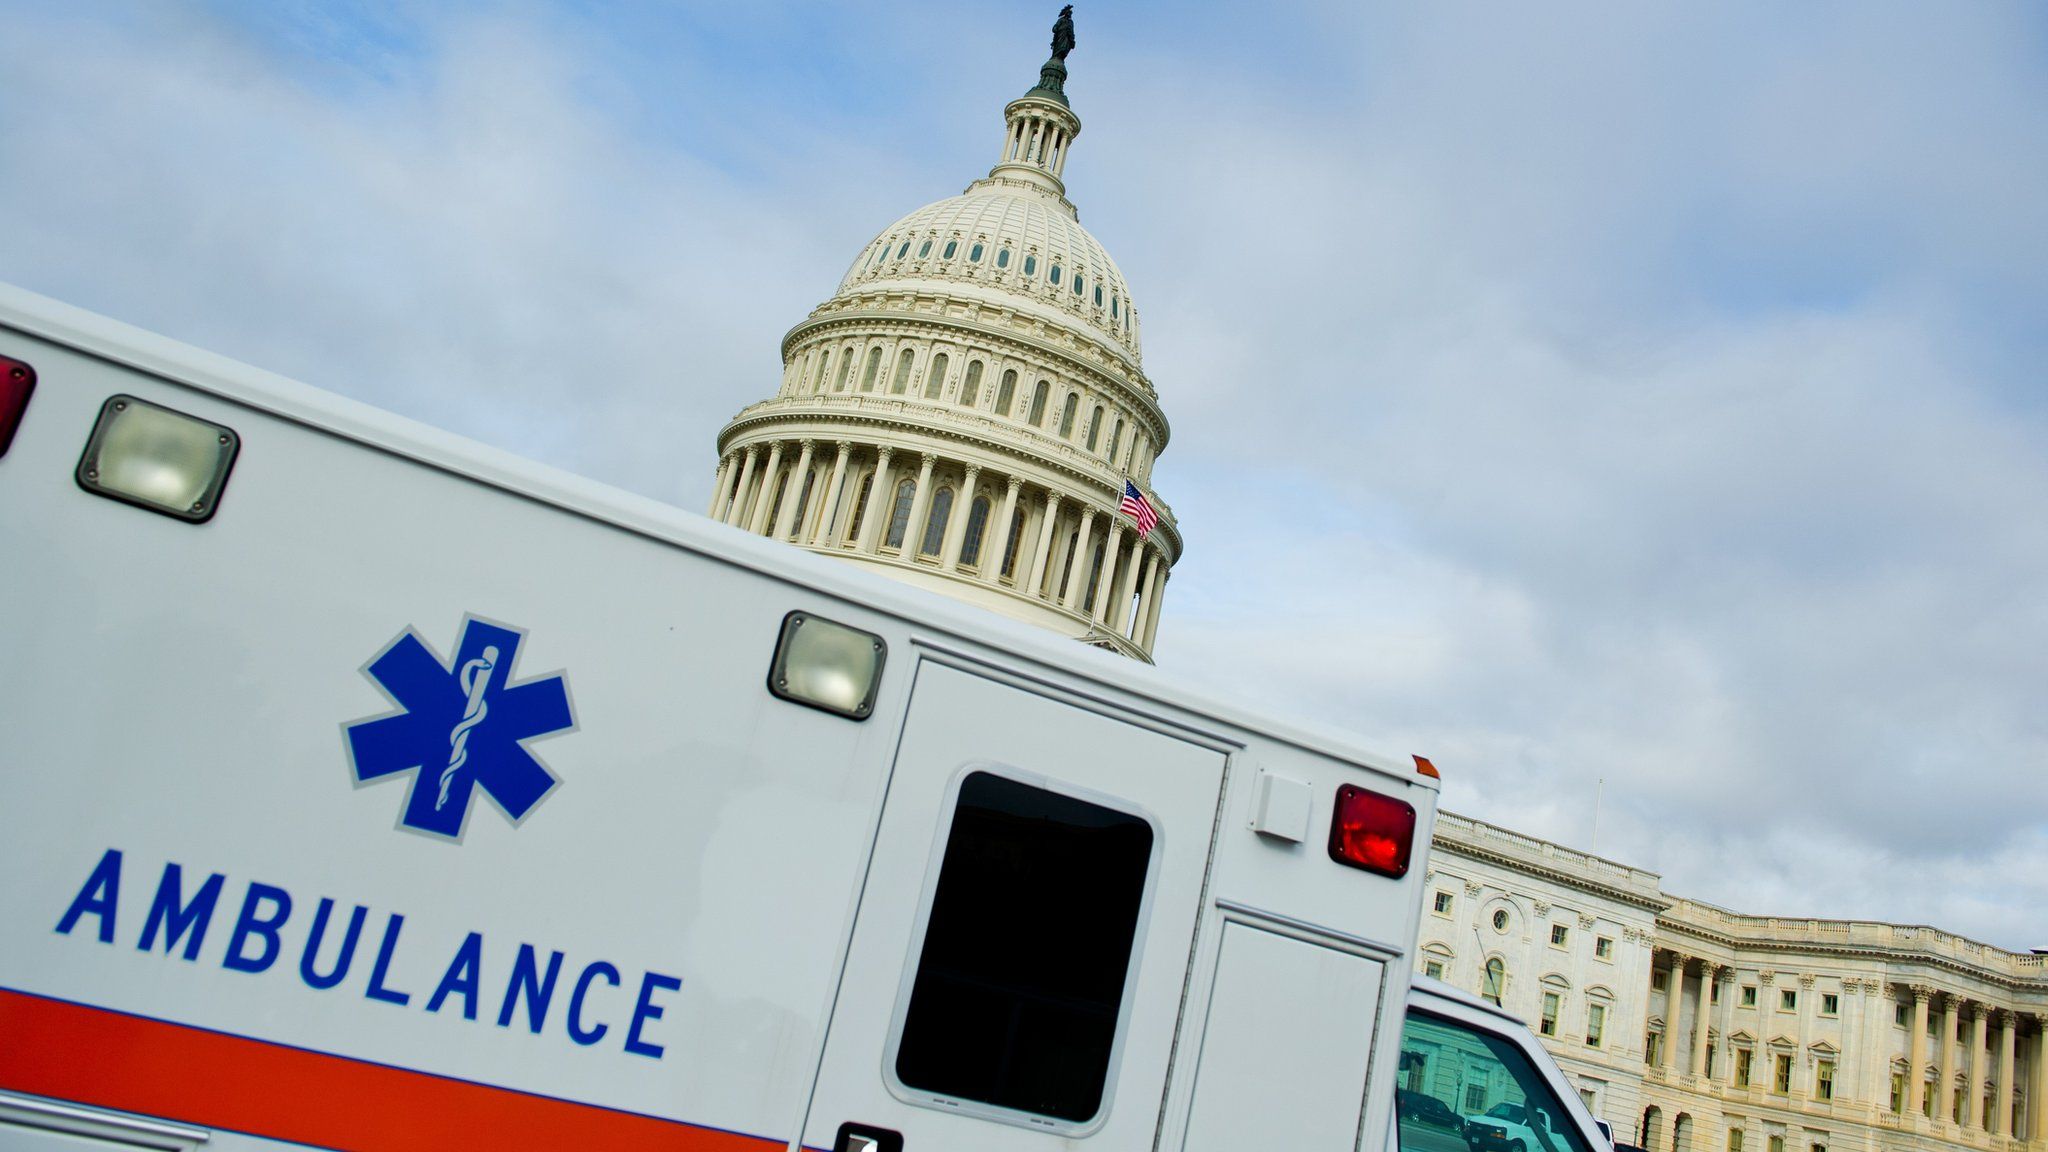 An ambulance is seen in front of the US Capitol October 16, 2013 in Washington, DC.